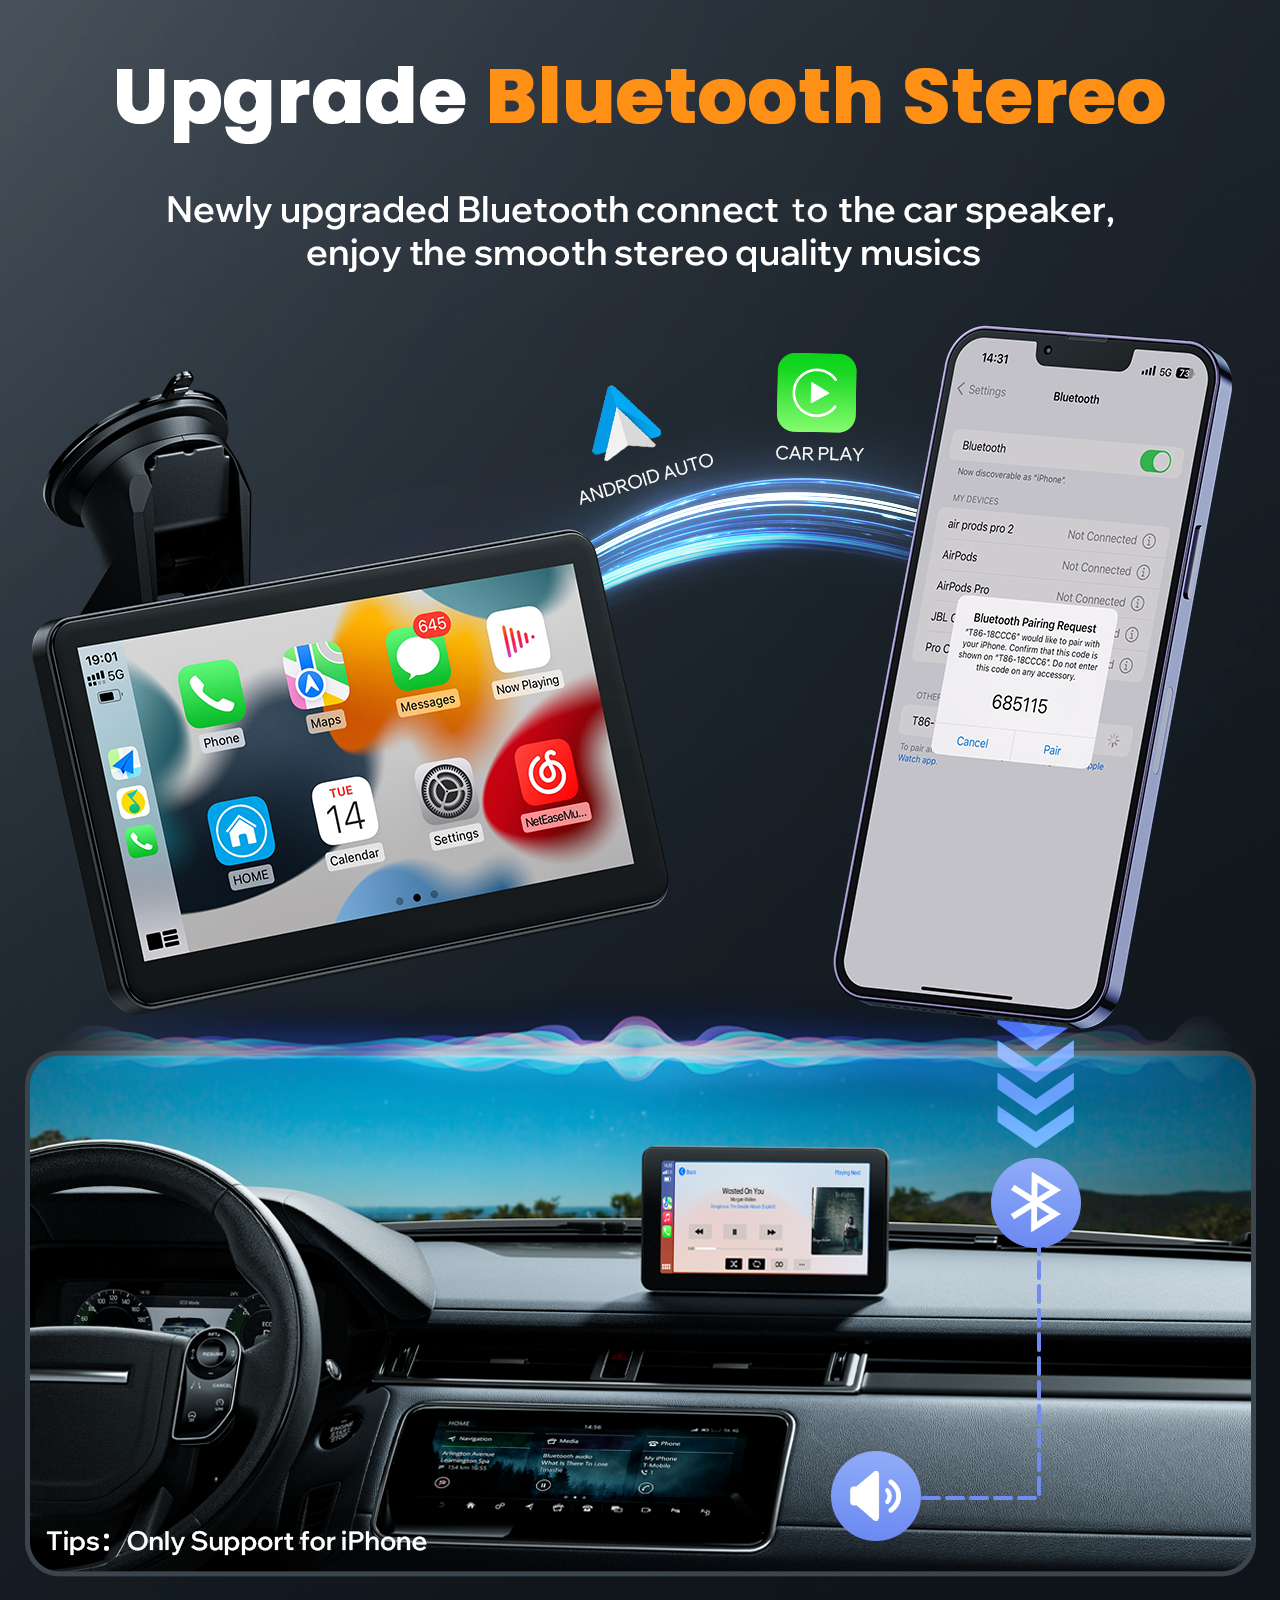 Wireless Apple Carplay Portable Car Stereo and Android Auto,Carplay Screen  for Car Radio with Bluetooth Hands-Free,7 Inch Touch Screen with Mirror